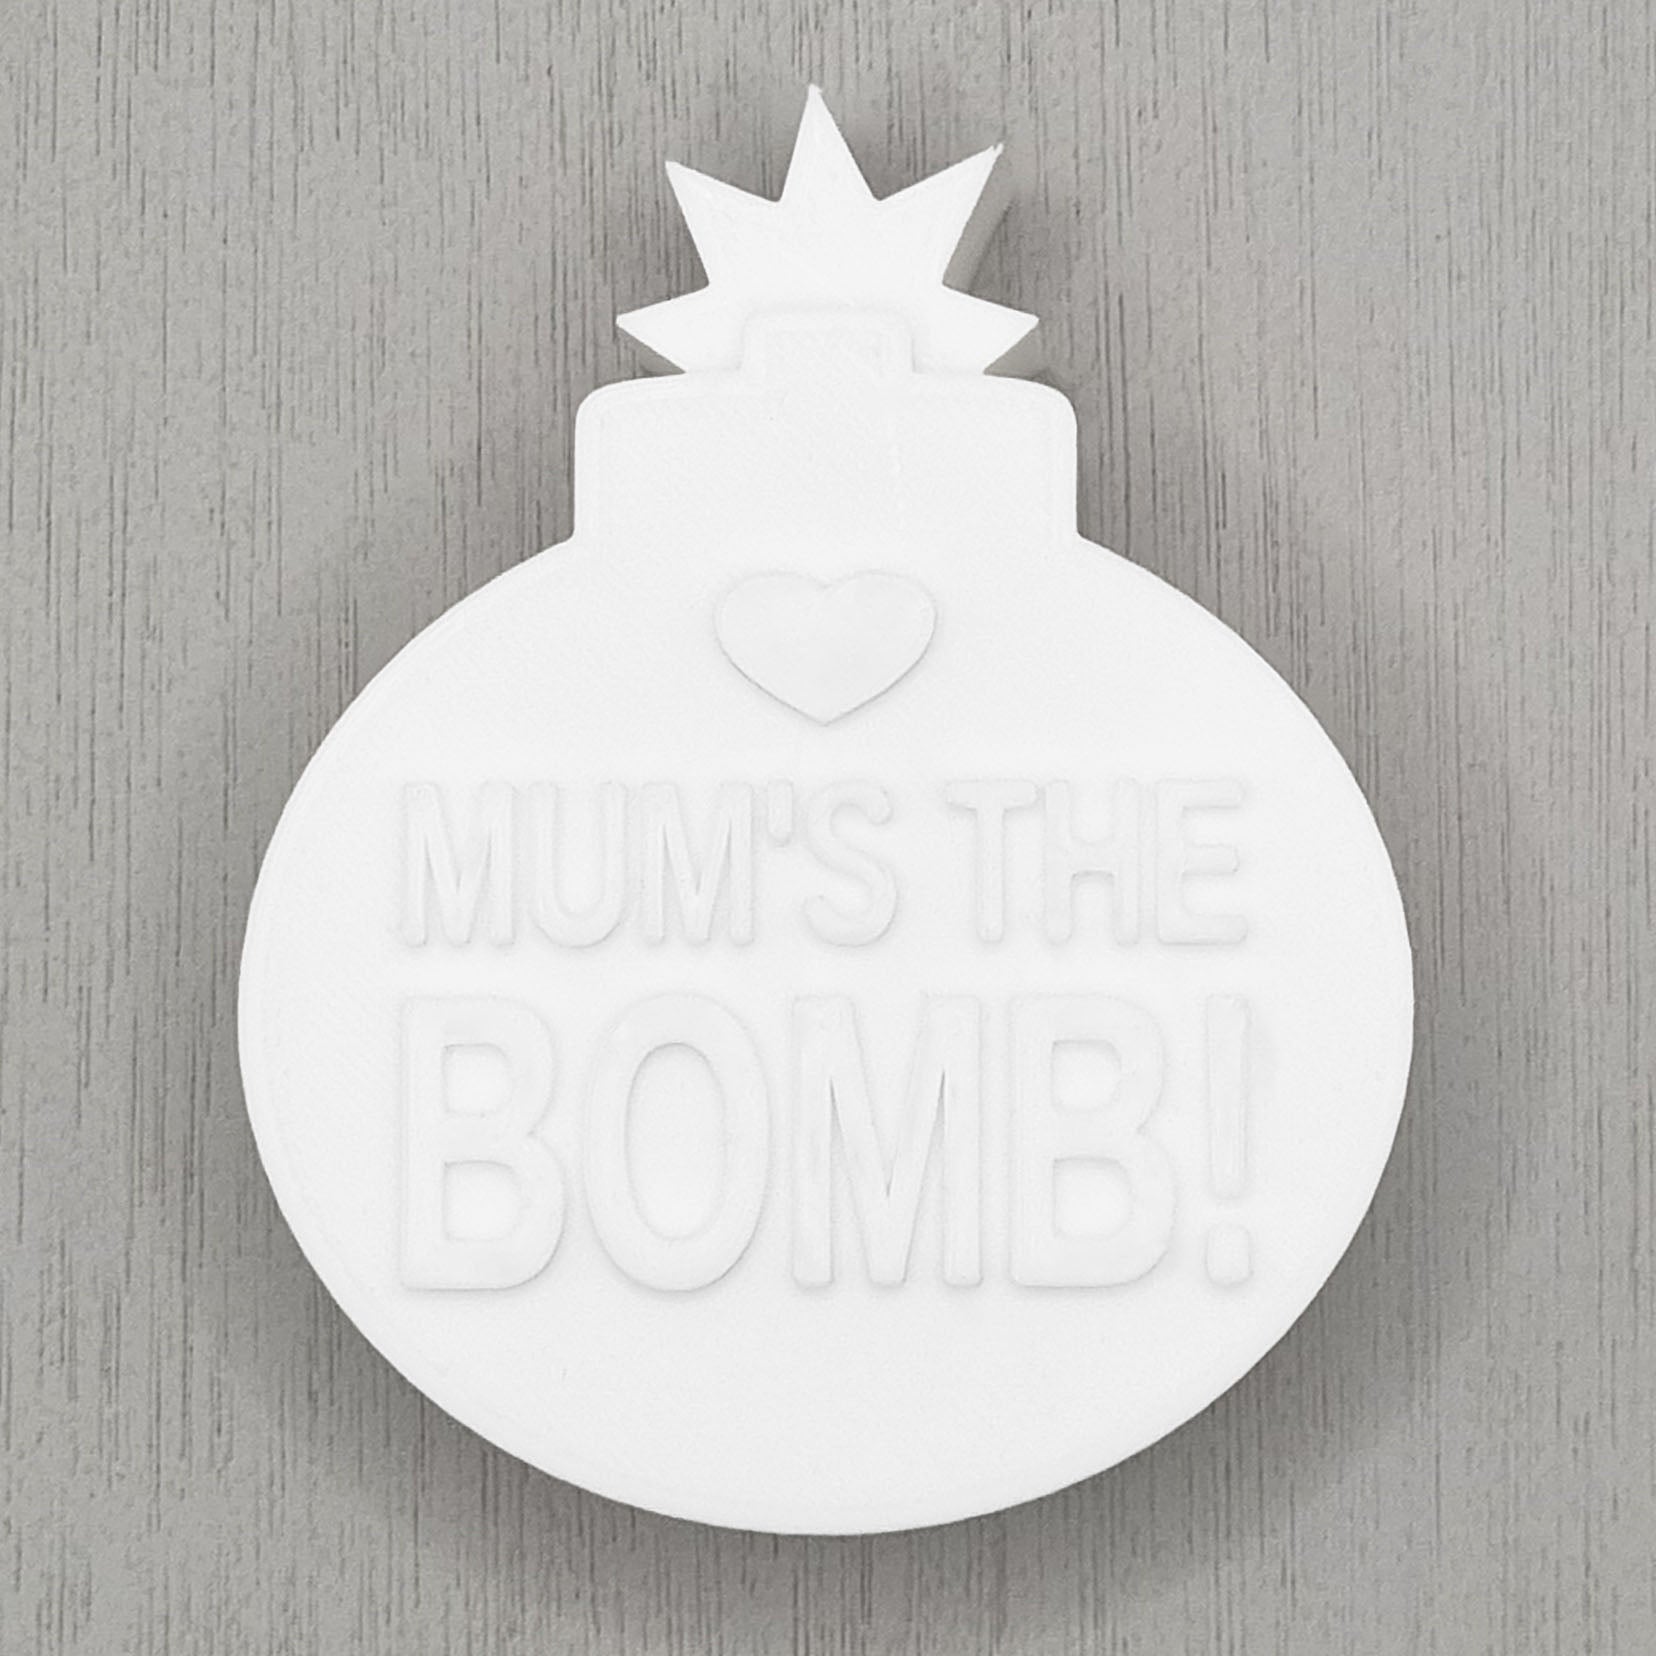 Mum's The Bomb Bath Bomb Mould | Truly Personal | Bath Bomb, Soap, Resin, Chocolate, Jelly, Wax Melts Mold